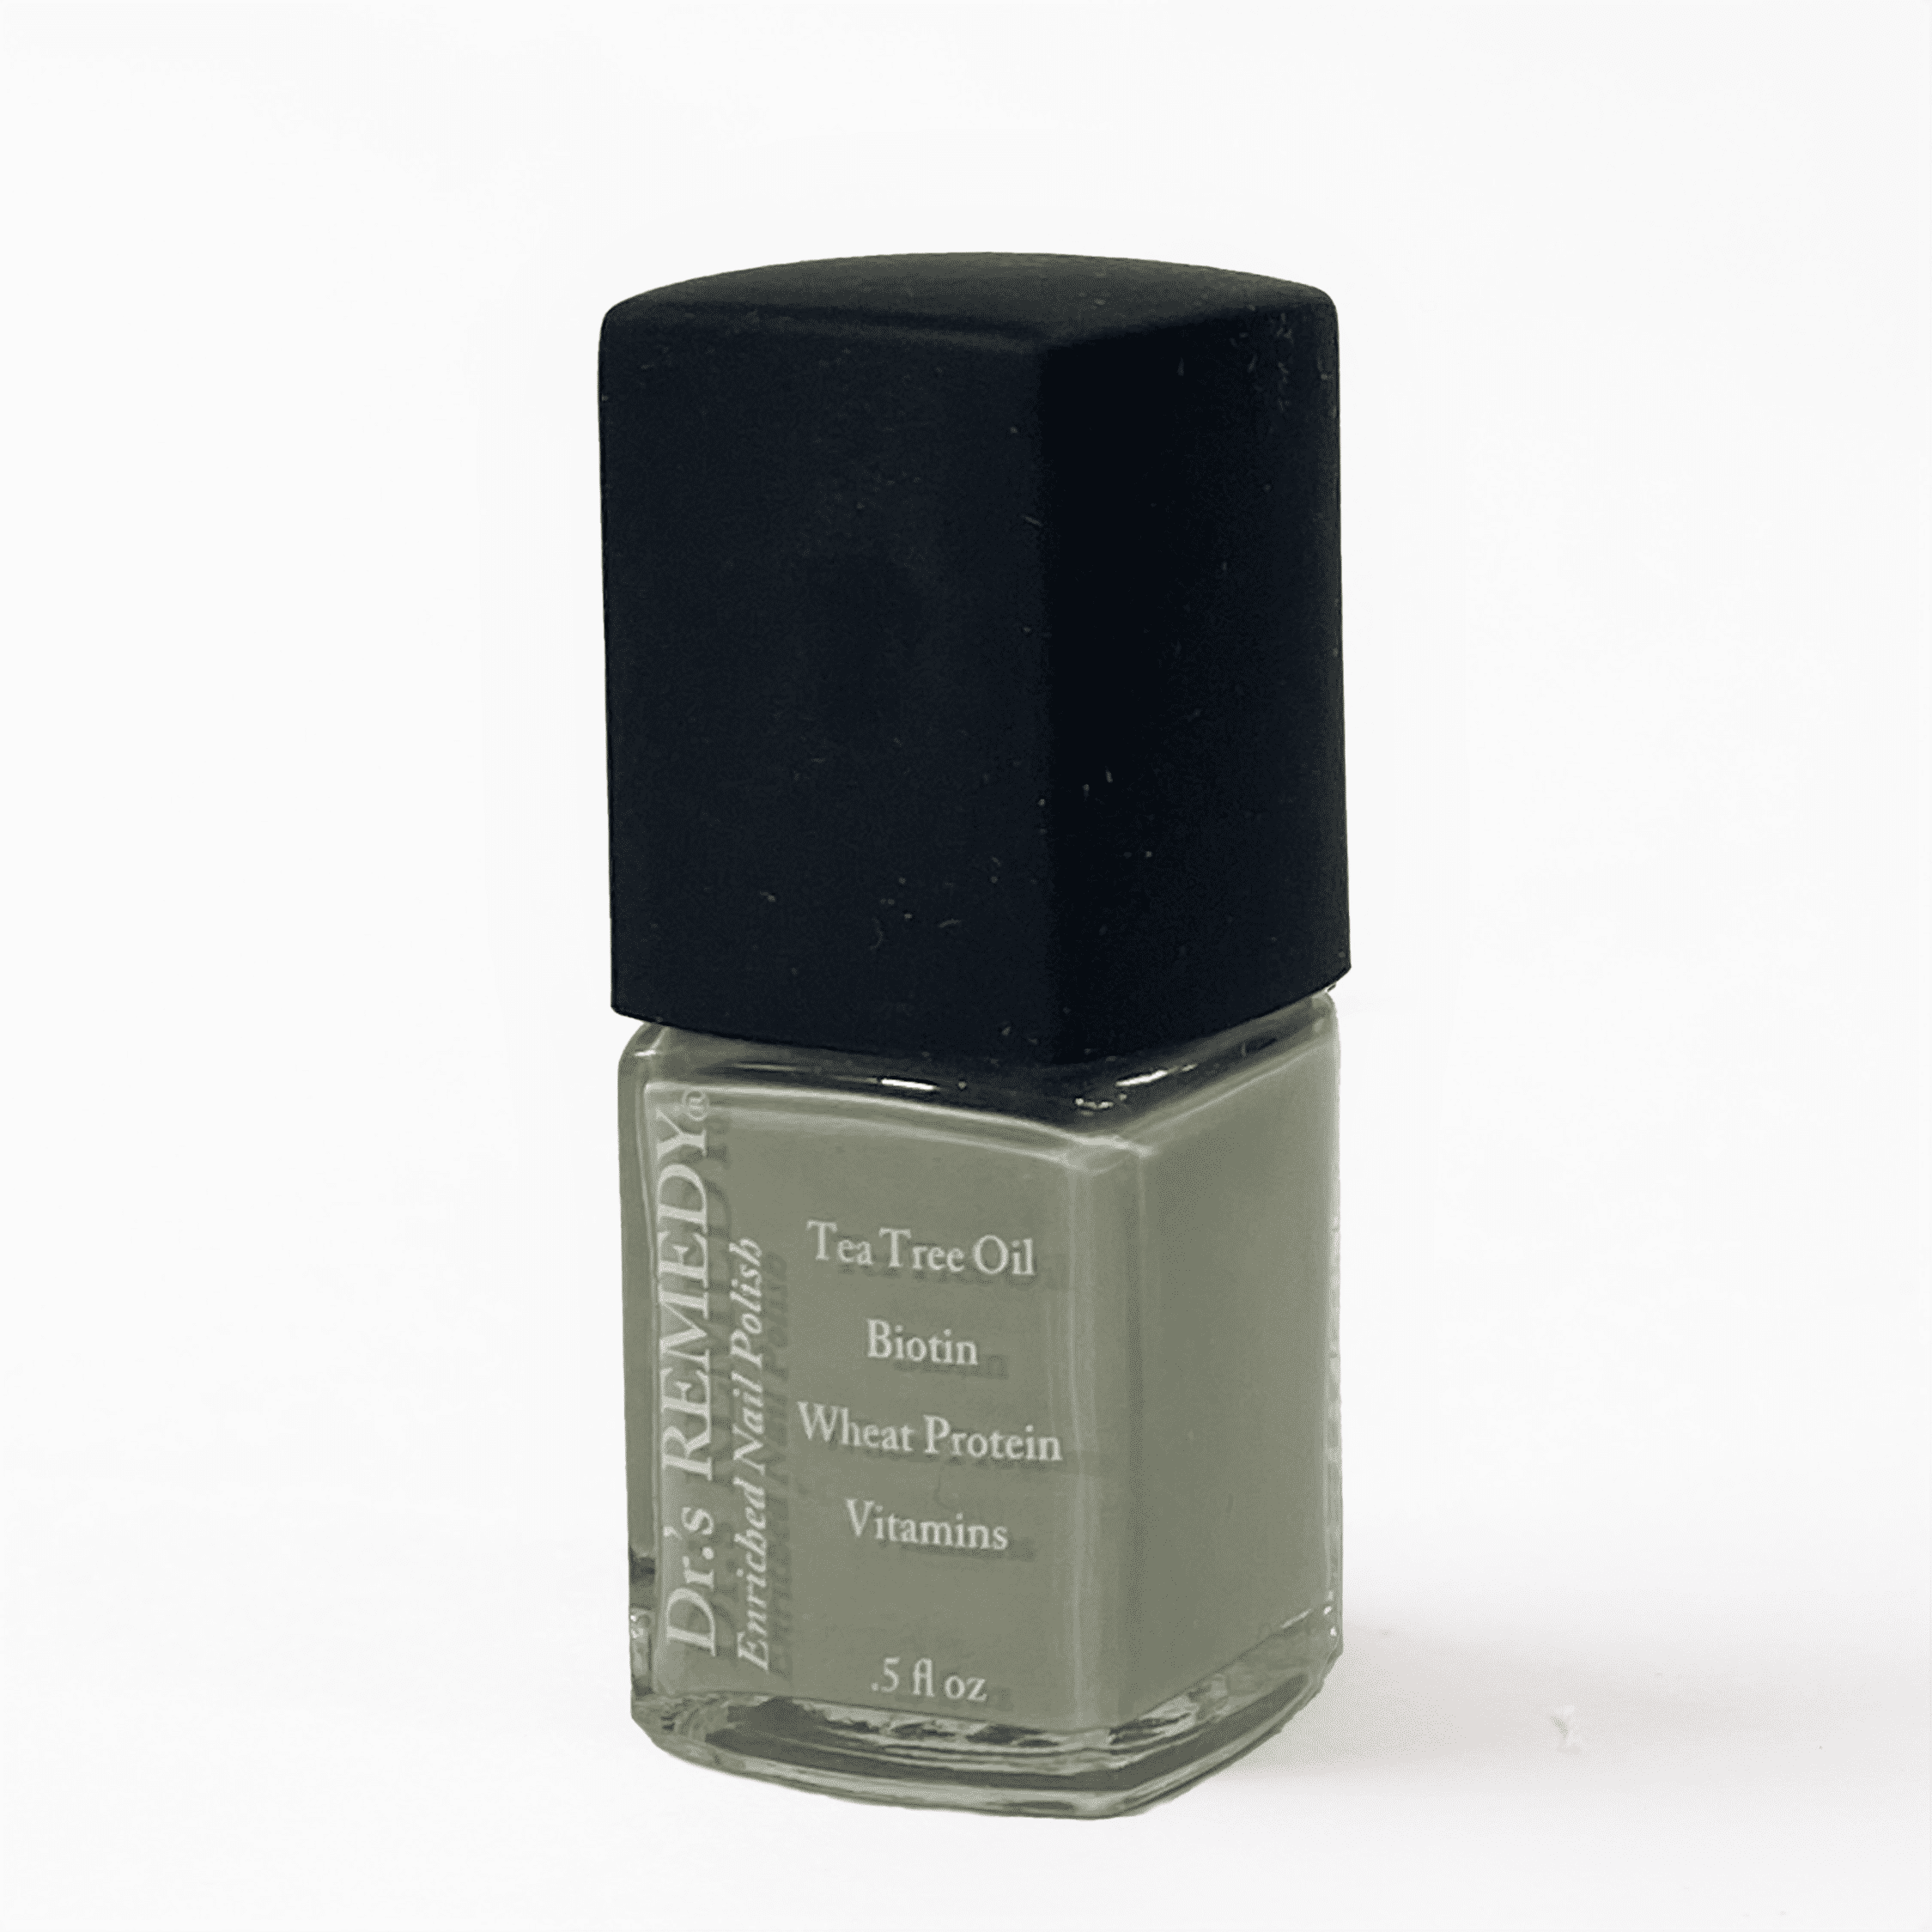 Dr.'s Remedy Enriched Nail Lacquer Serenity Sage (15mL)